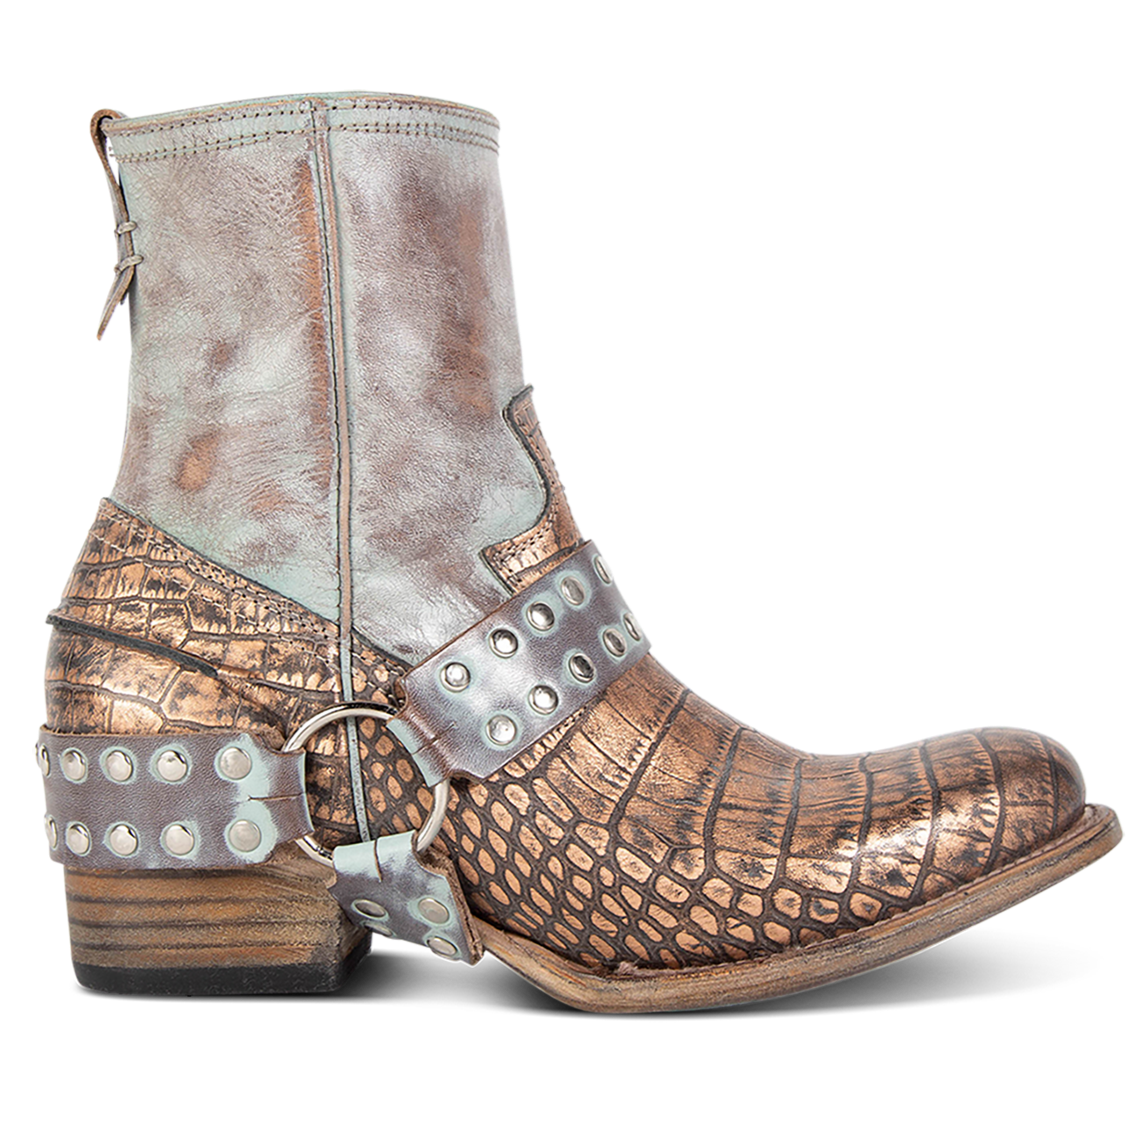 FREEBIRD women's Ramone blush multi full grain leather western crown bootie with inside zip closure and embellished harness